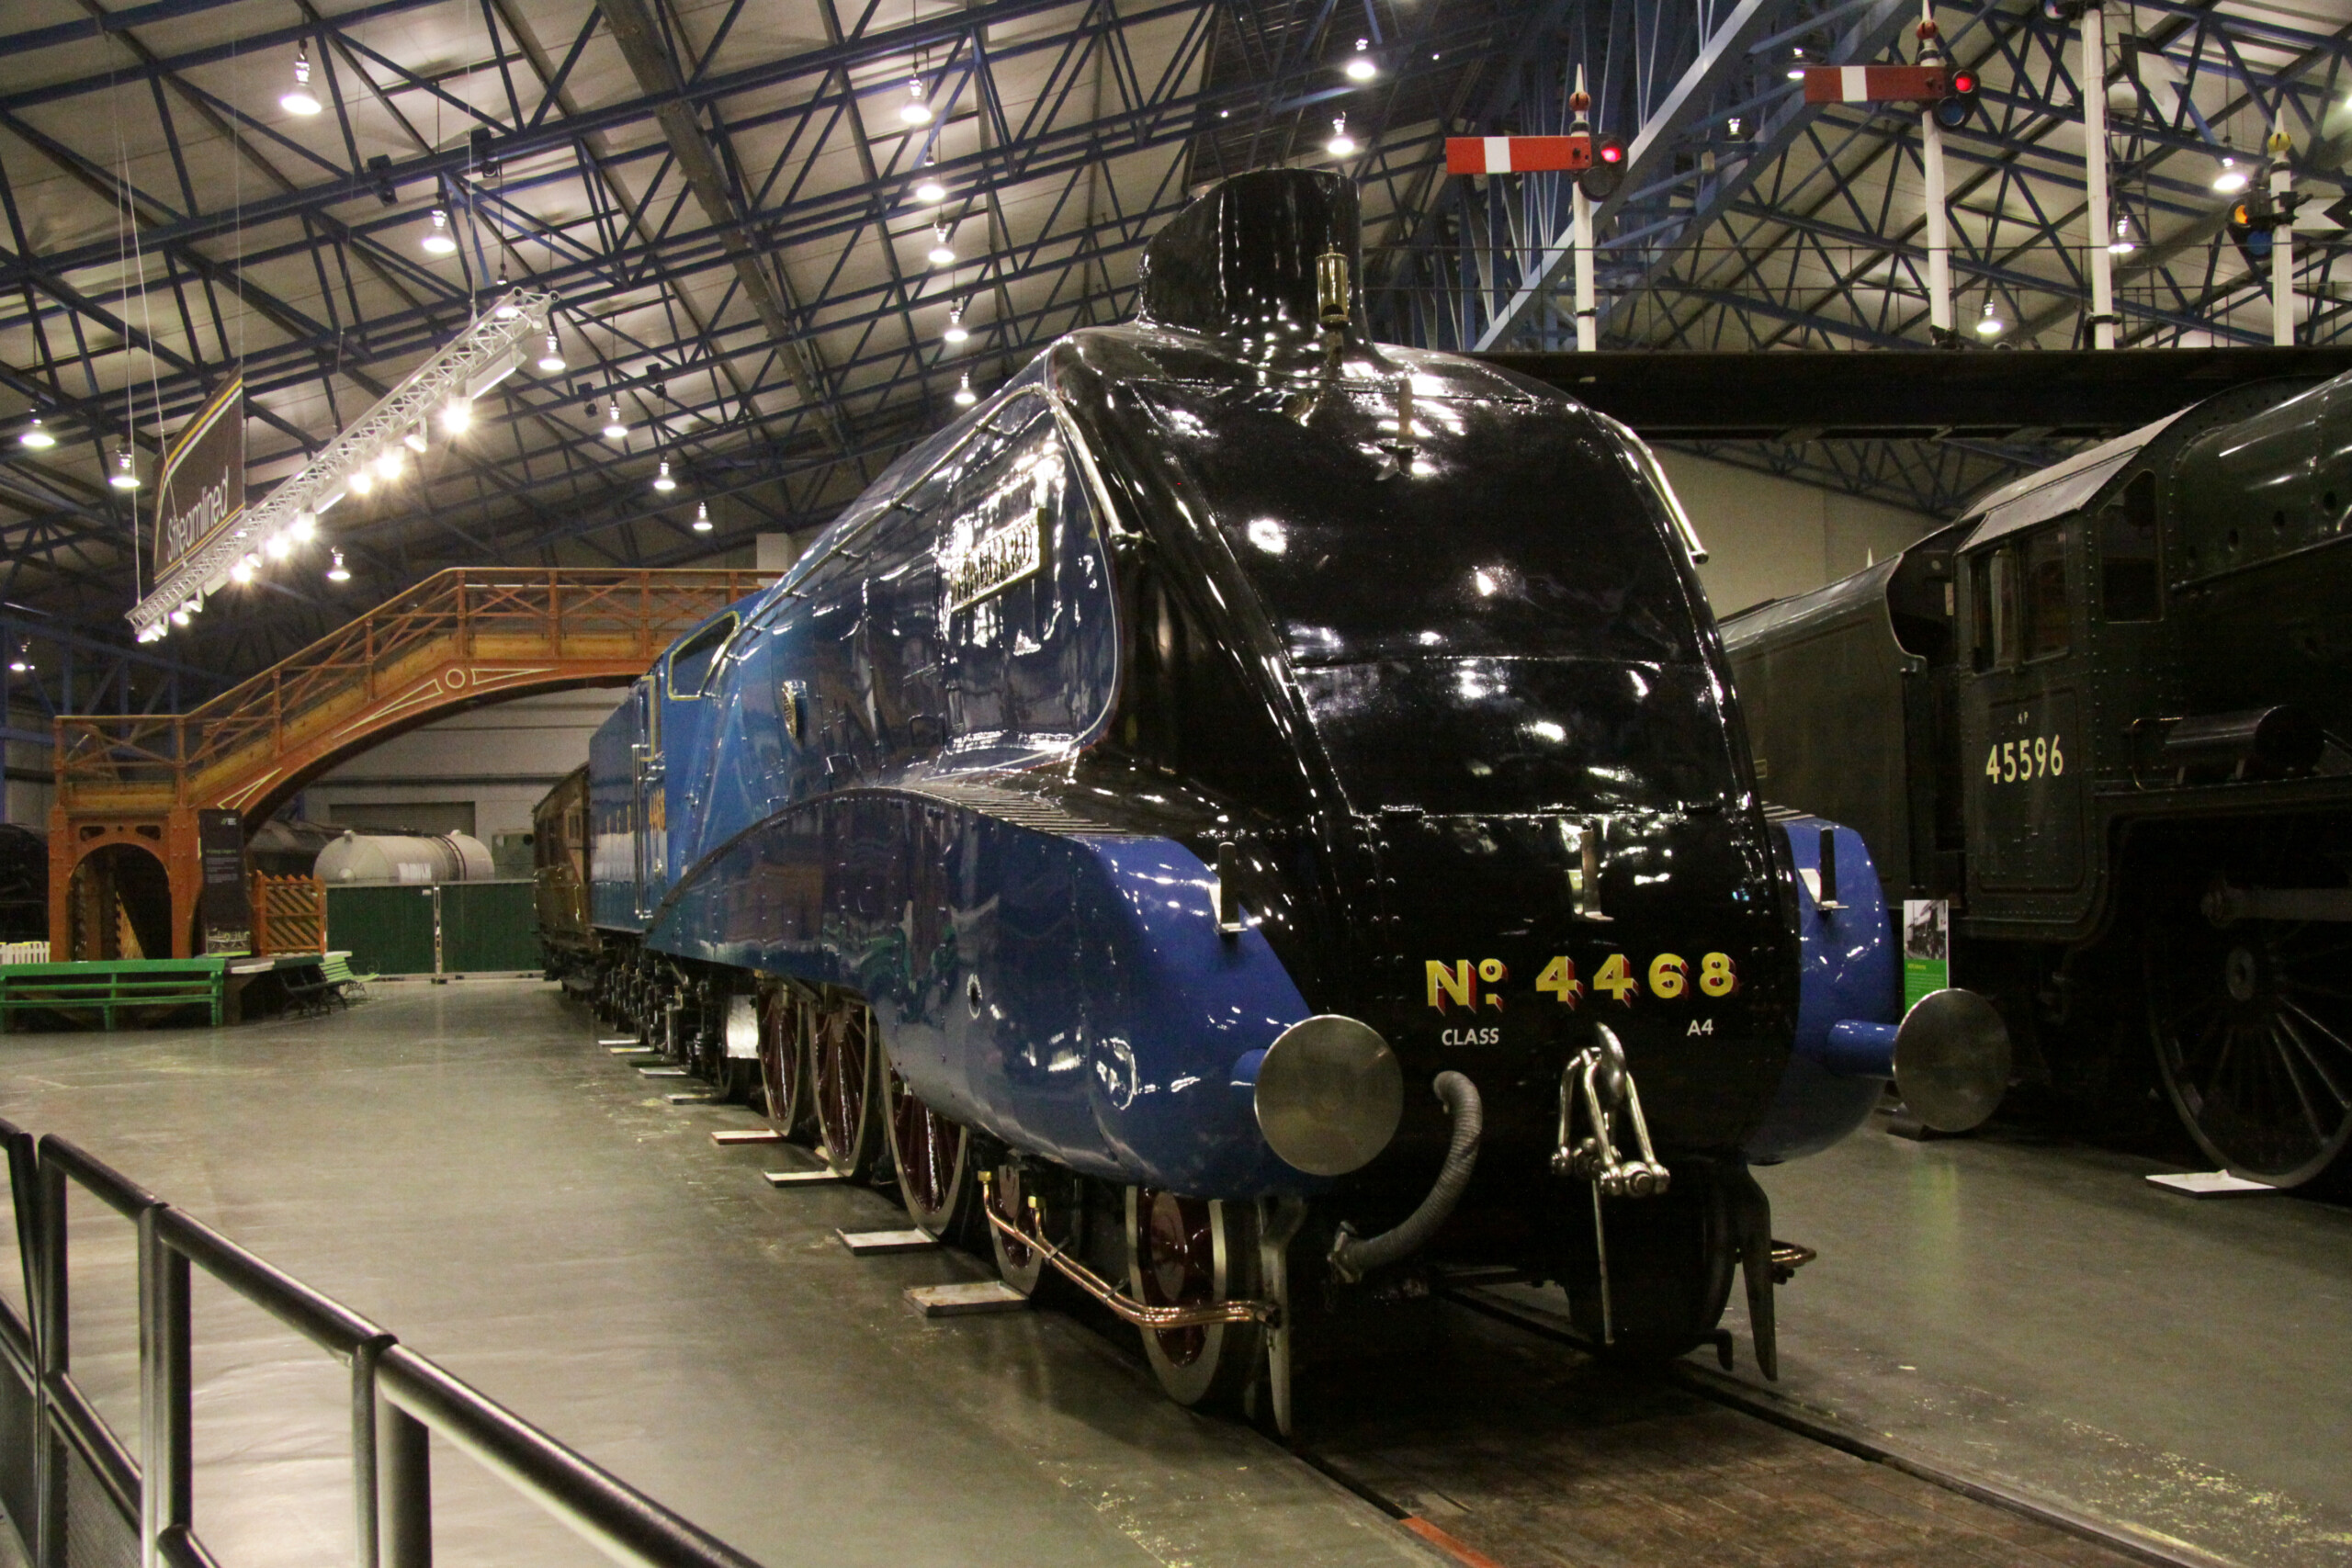 Blue and black aerodynamic steam locomotive in a museum hall